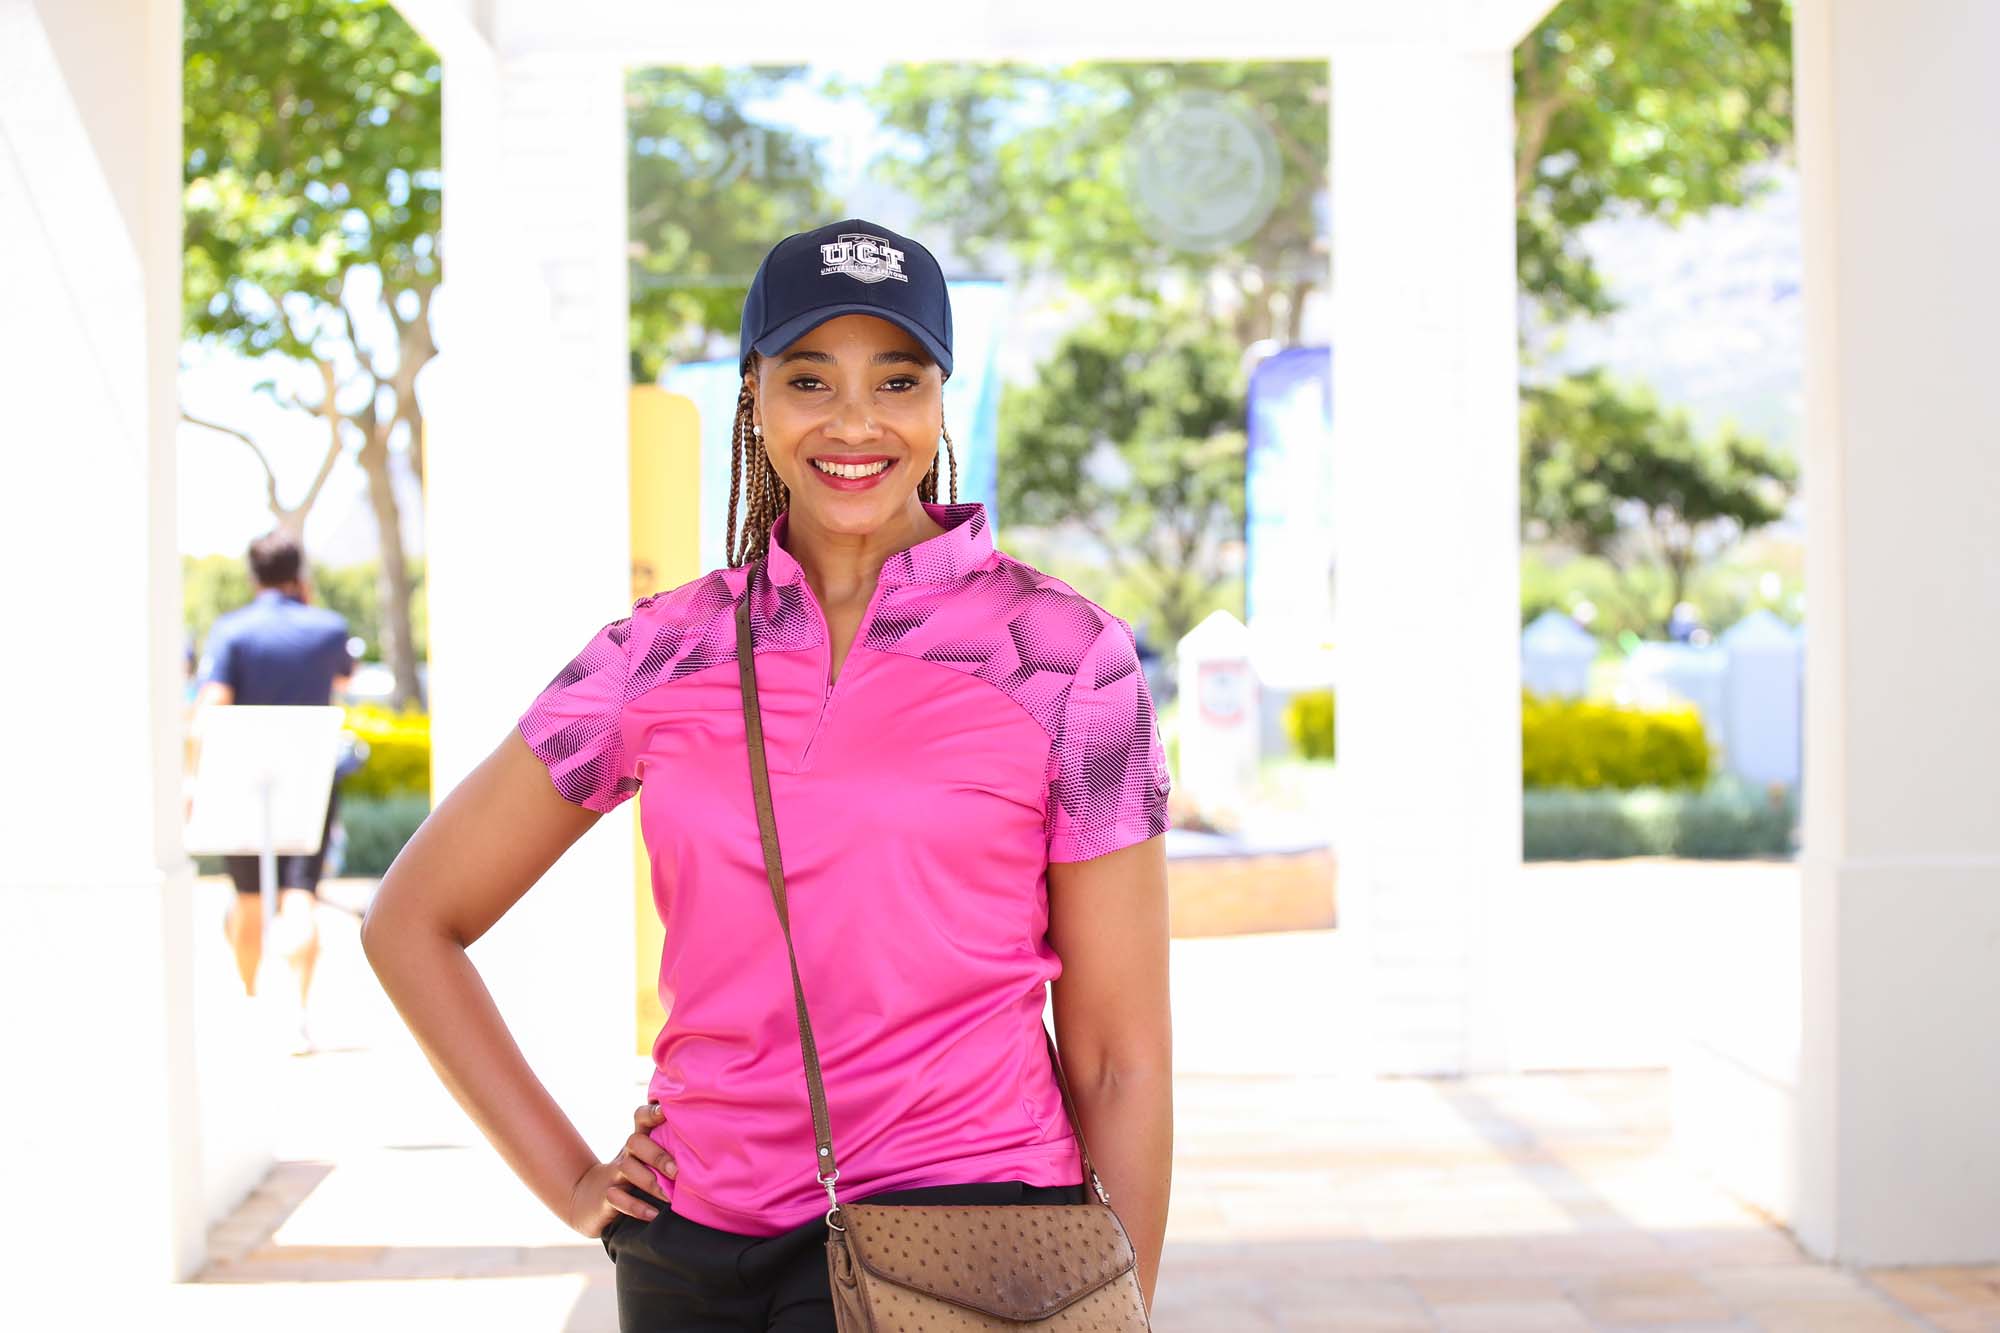 UCT Golf Day: A swinging success | UCT News